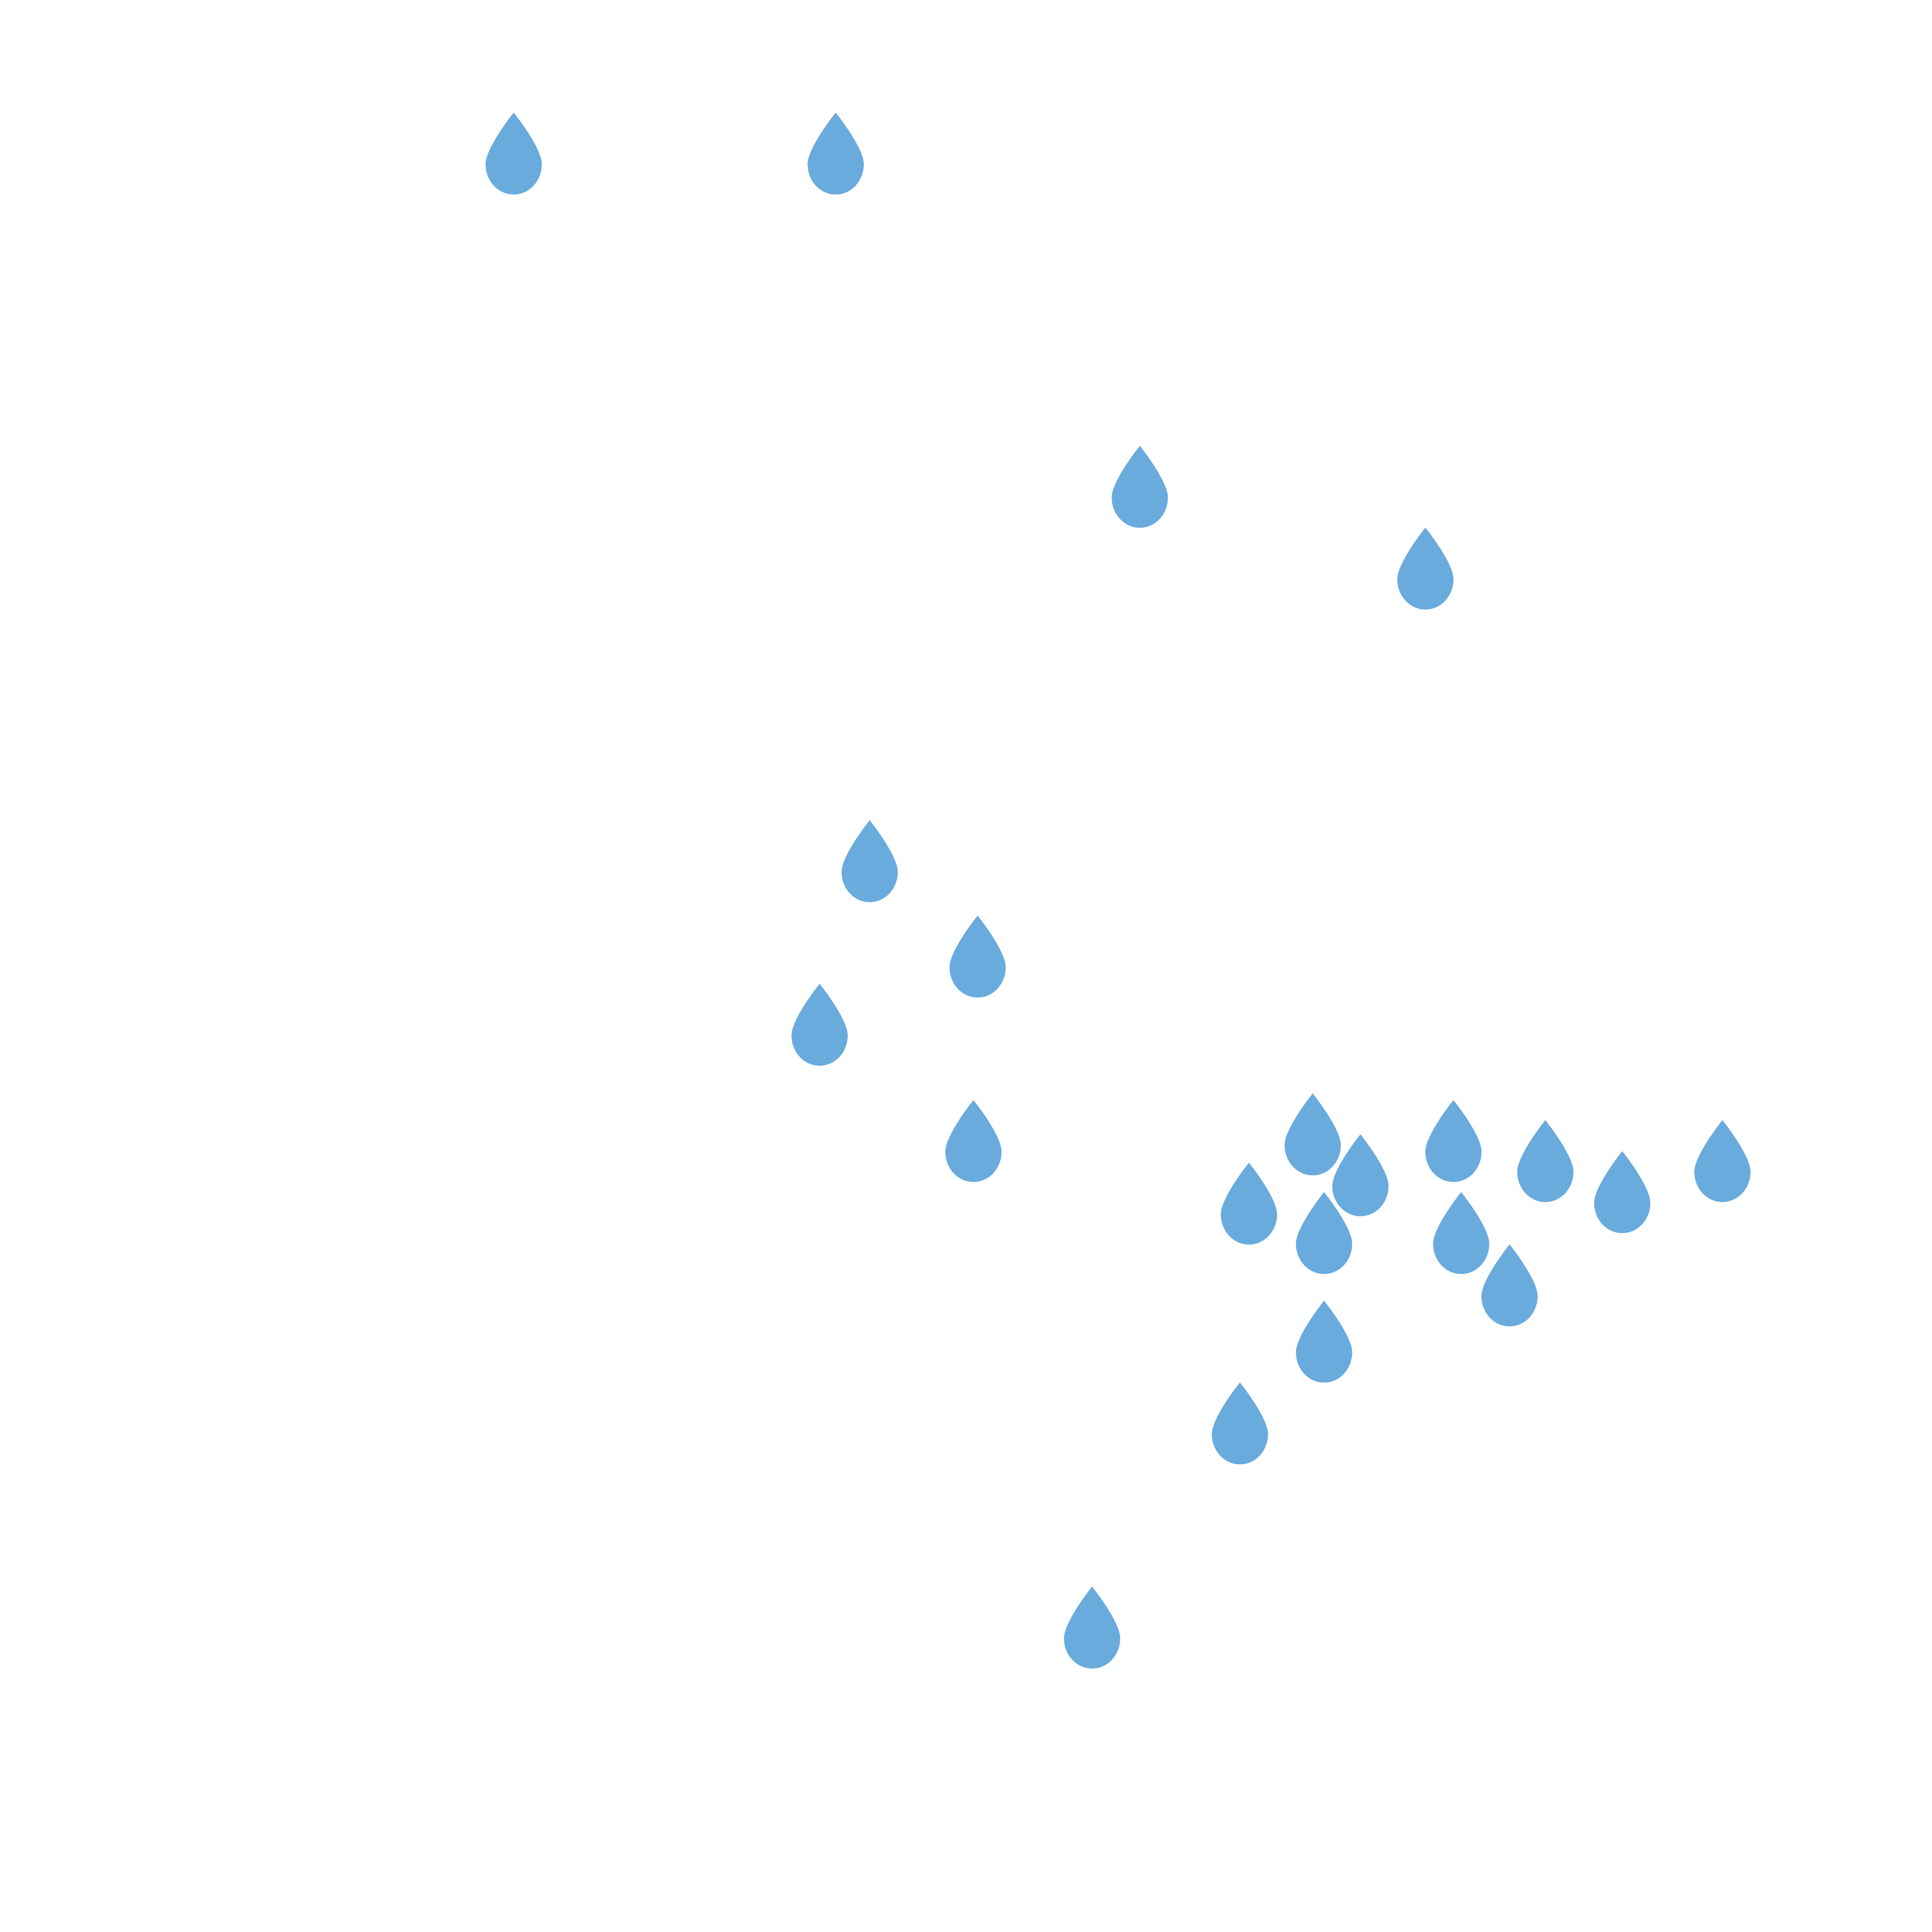 A map of LA county with water droplets falling onto the map to represent the replenishment of LA county groundwater basins 